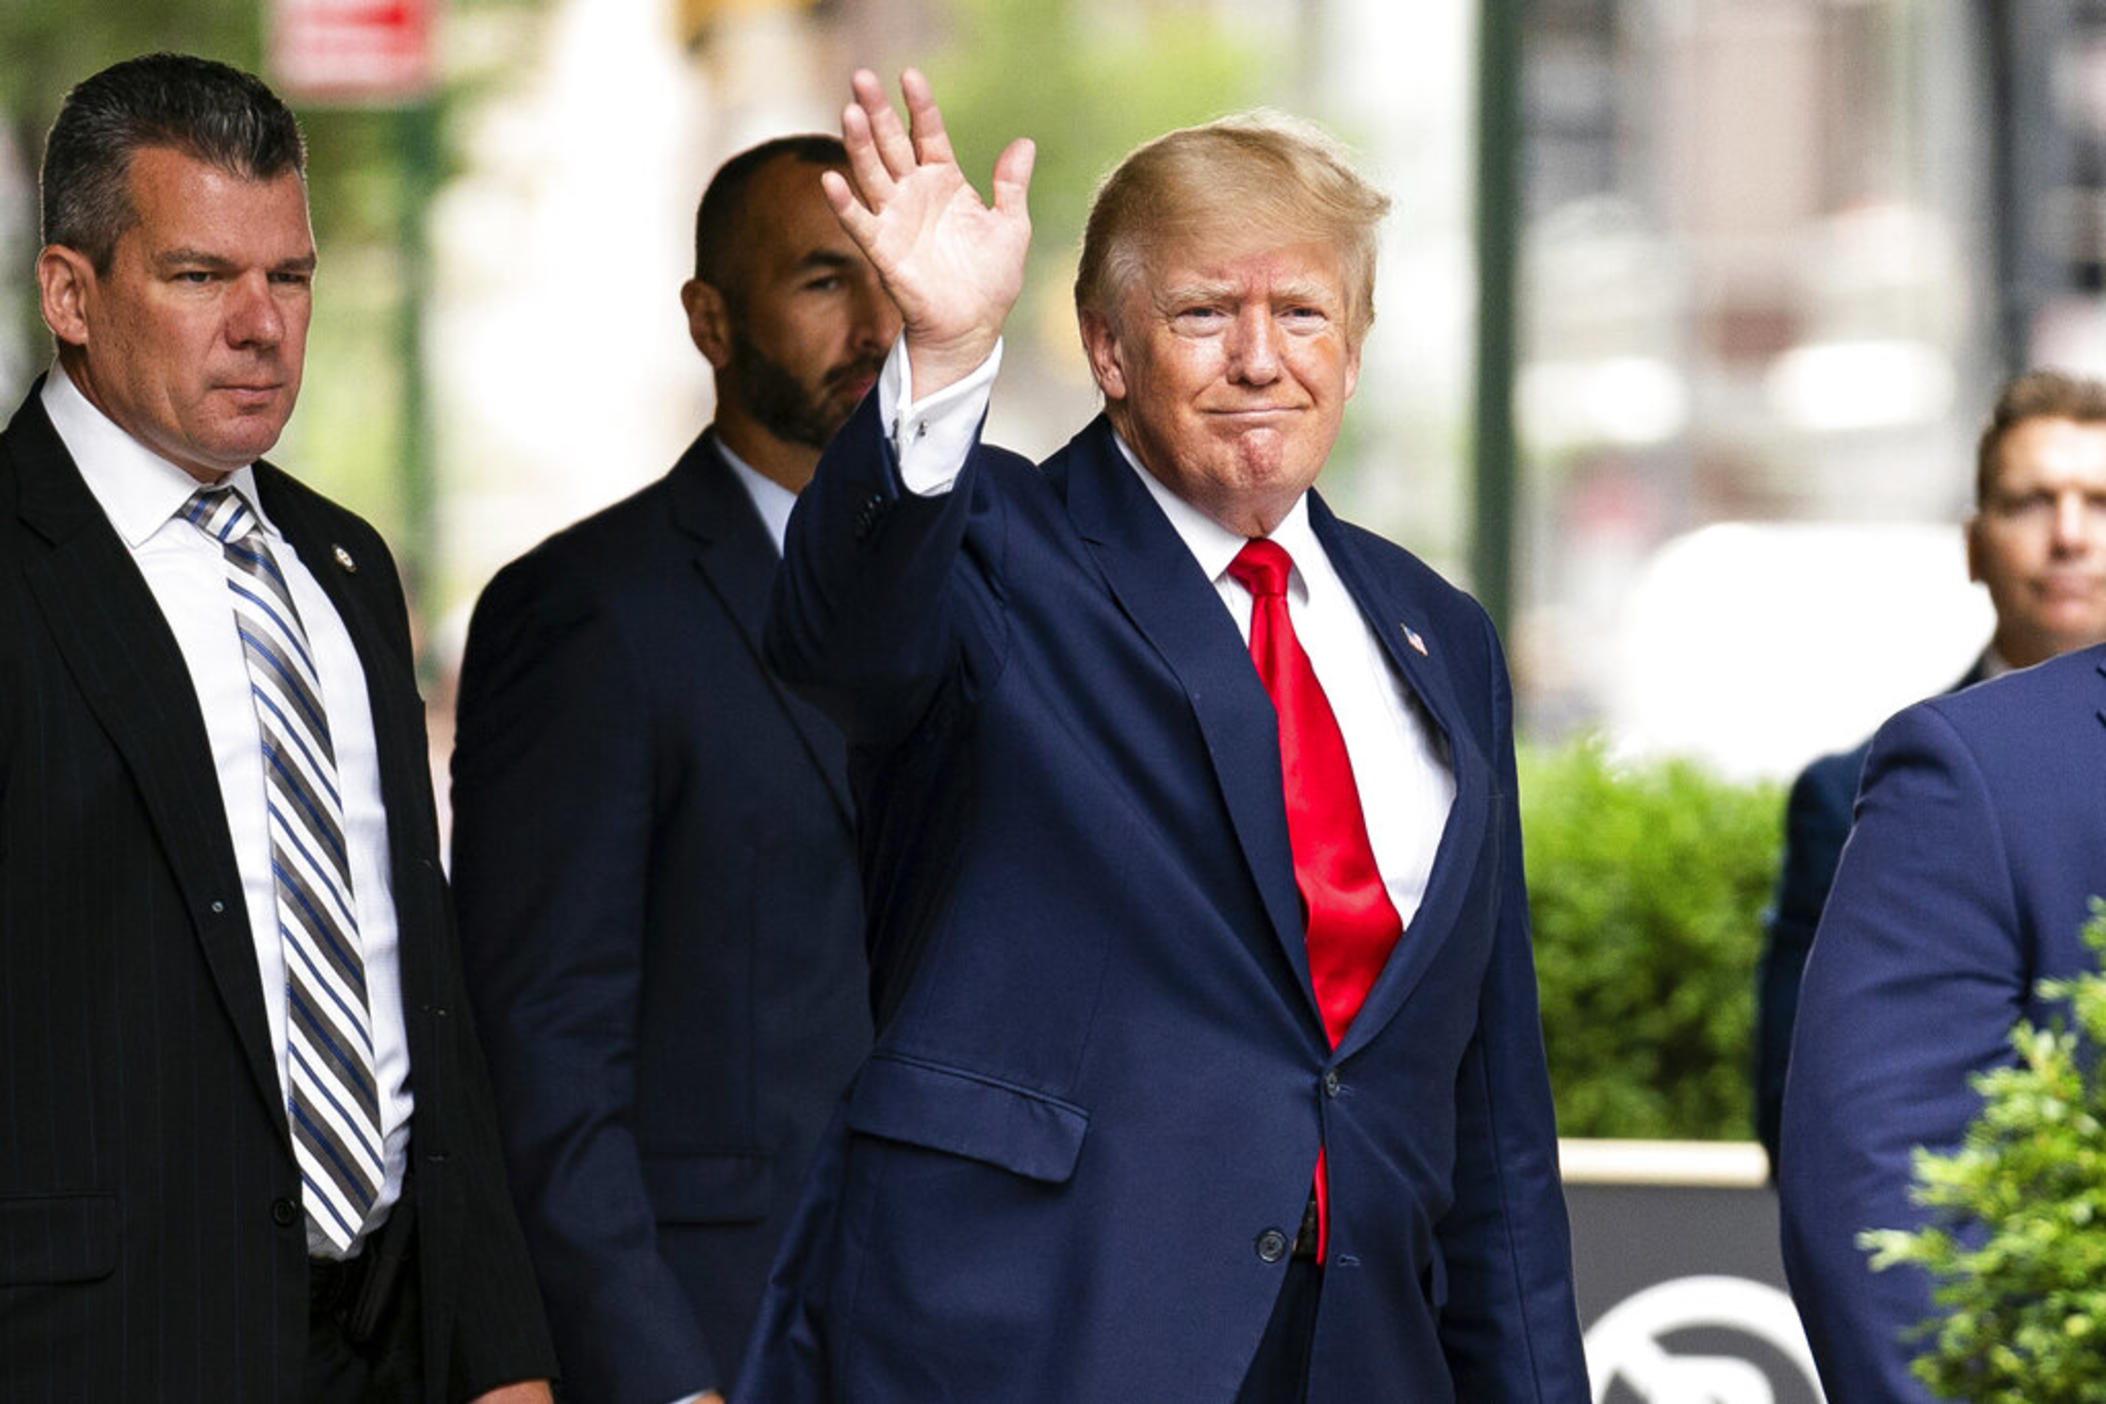 Former President Donald Trump waves as he departs Trump Tower, Wednesday, Aug. 10, 2022, in New York, on his way to the New York attorney general's office for a deposition in a civil investigation.